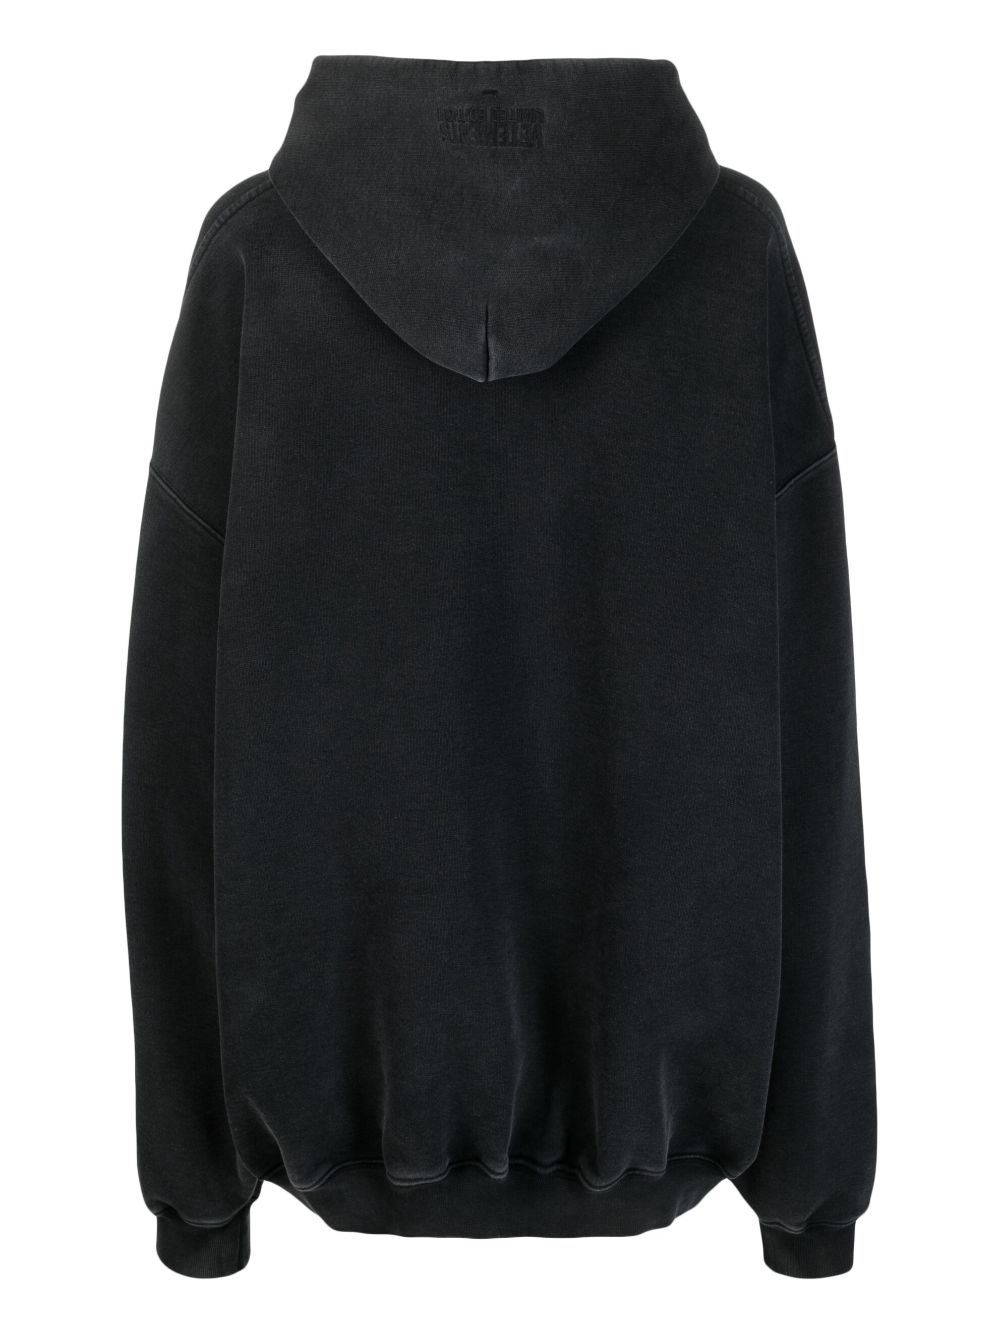 VETEMENTS Classic Black Logo Hoodie for Women - FW23 Collection